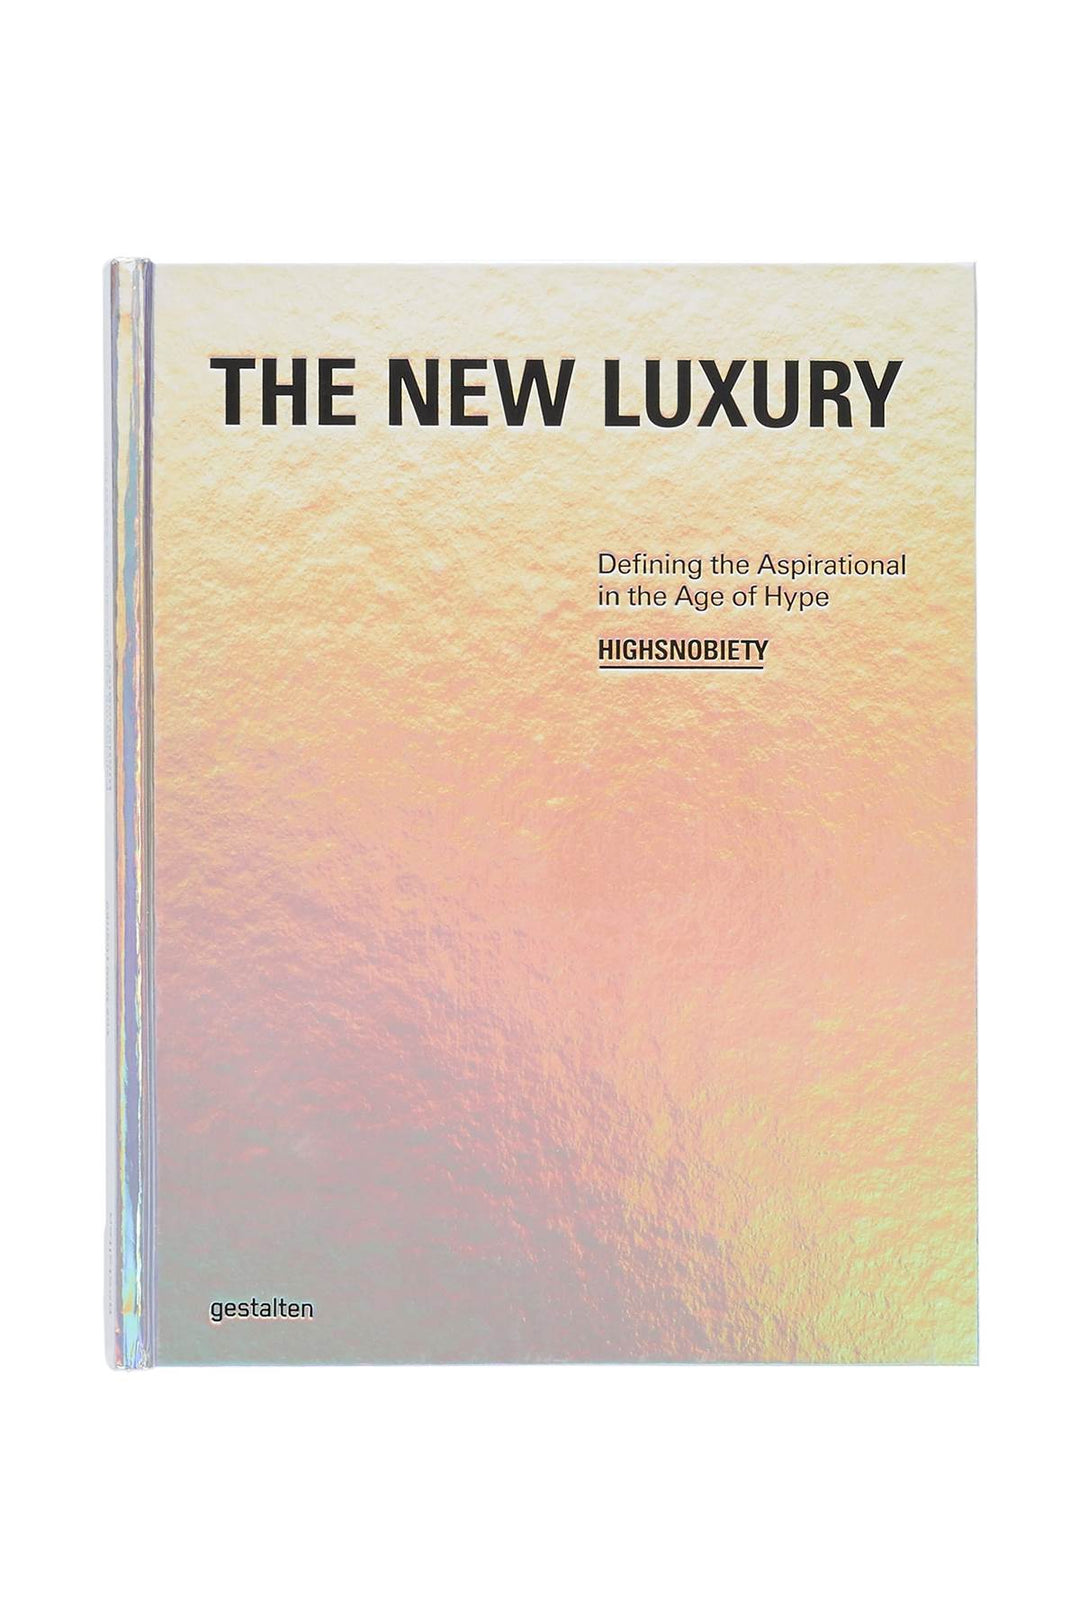 The New Luxury   Highsnobiety: Defining The Aspirational In The Age Of Hype - New Mags - CLT